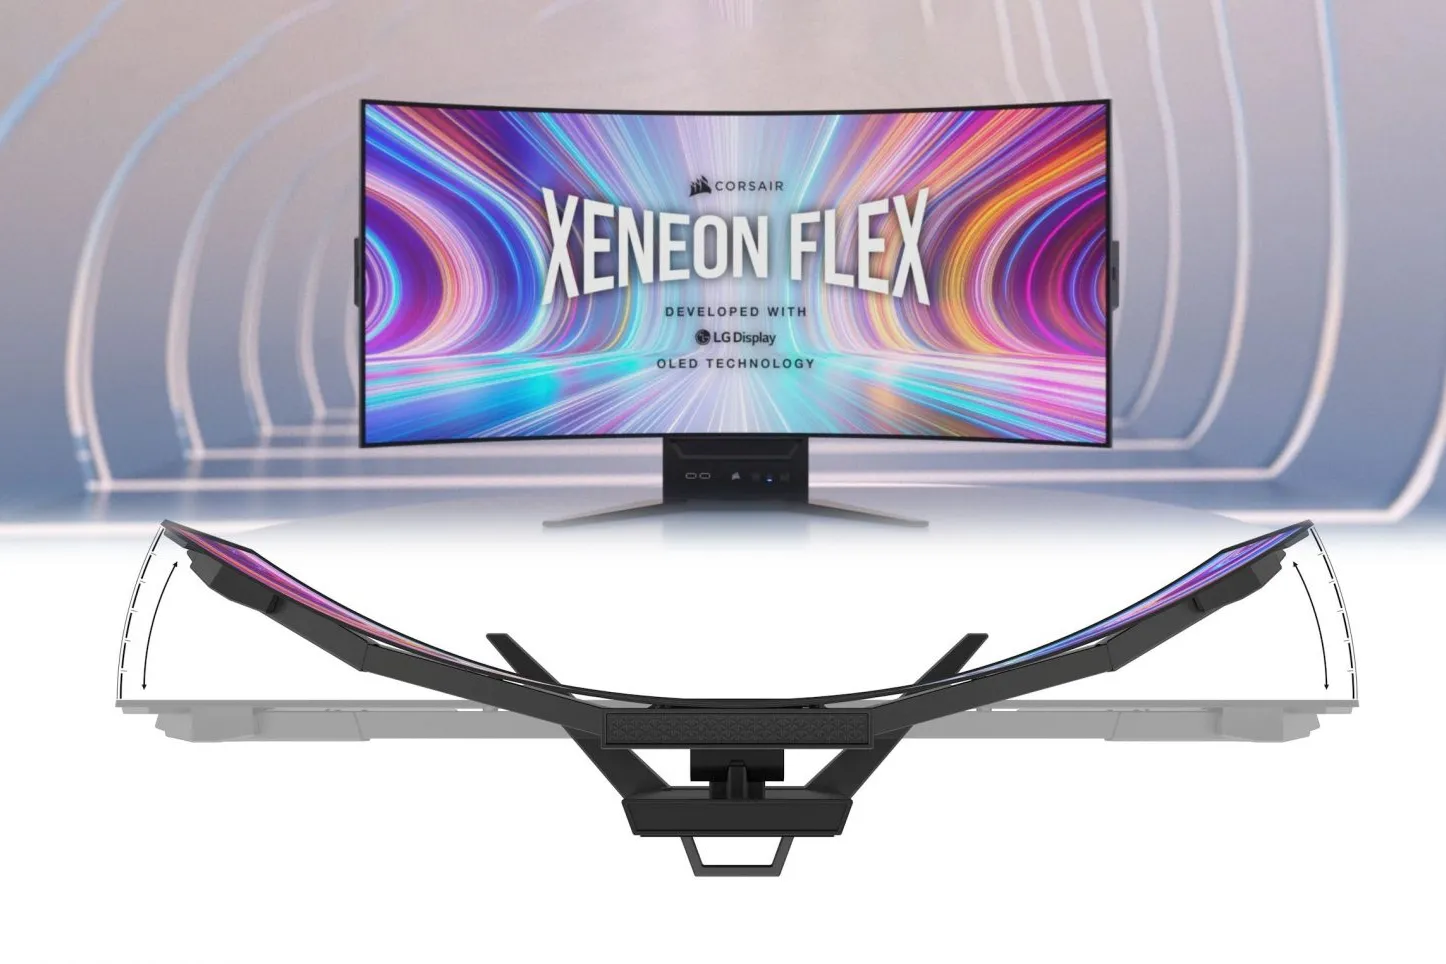 CORSAIR introduces the new XENEON FLEX OLED gaming monitor